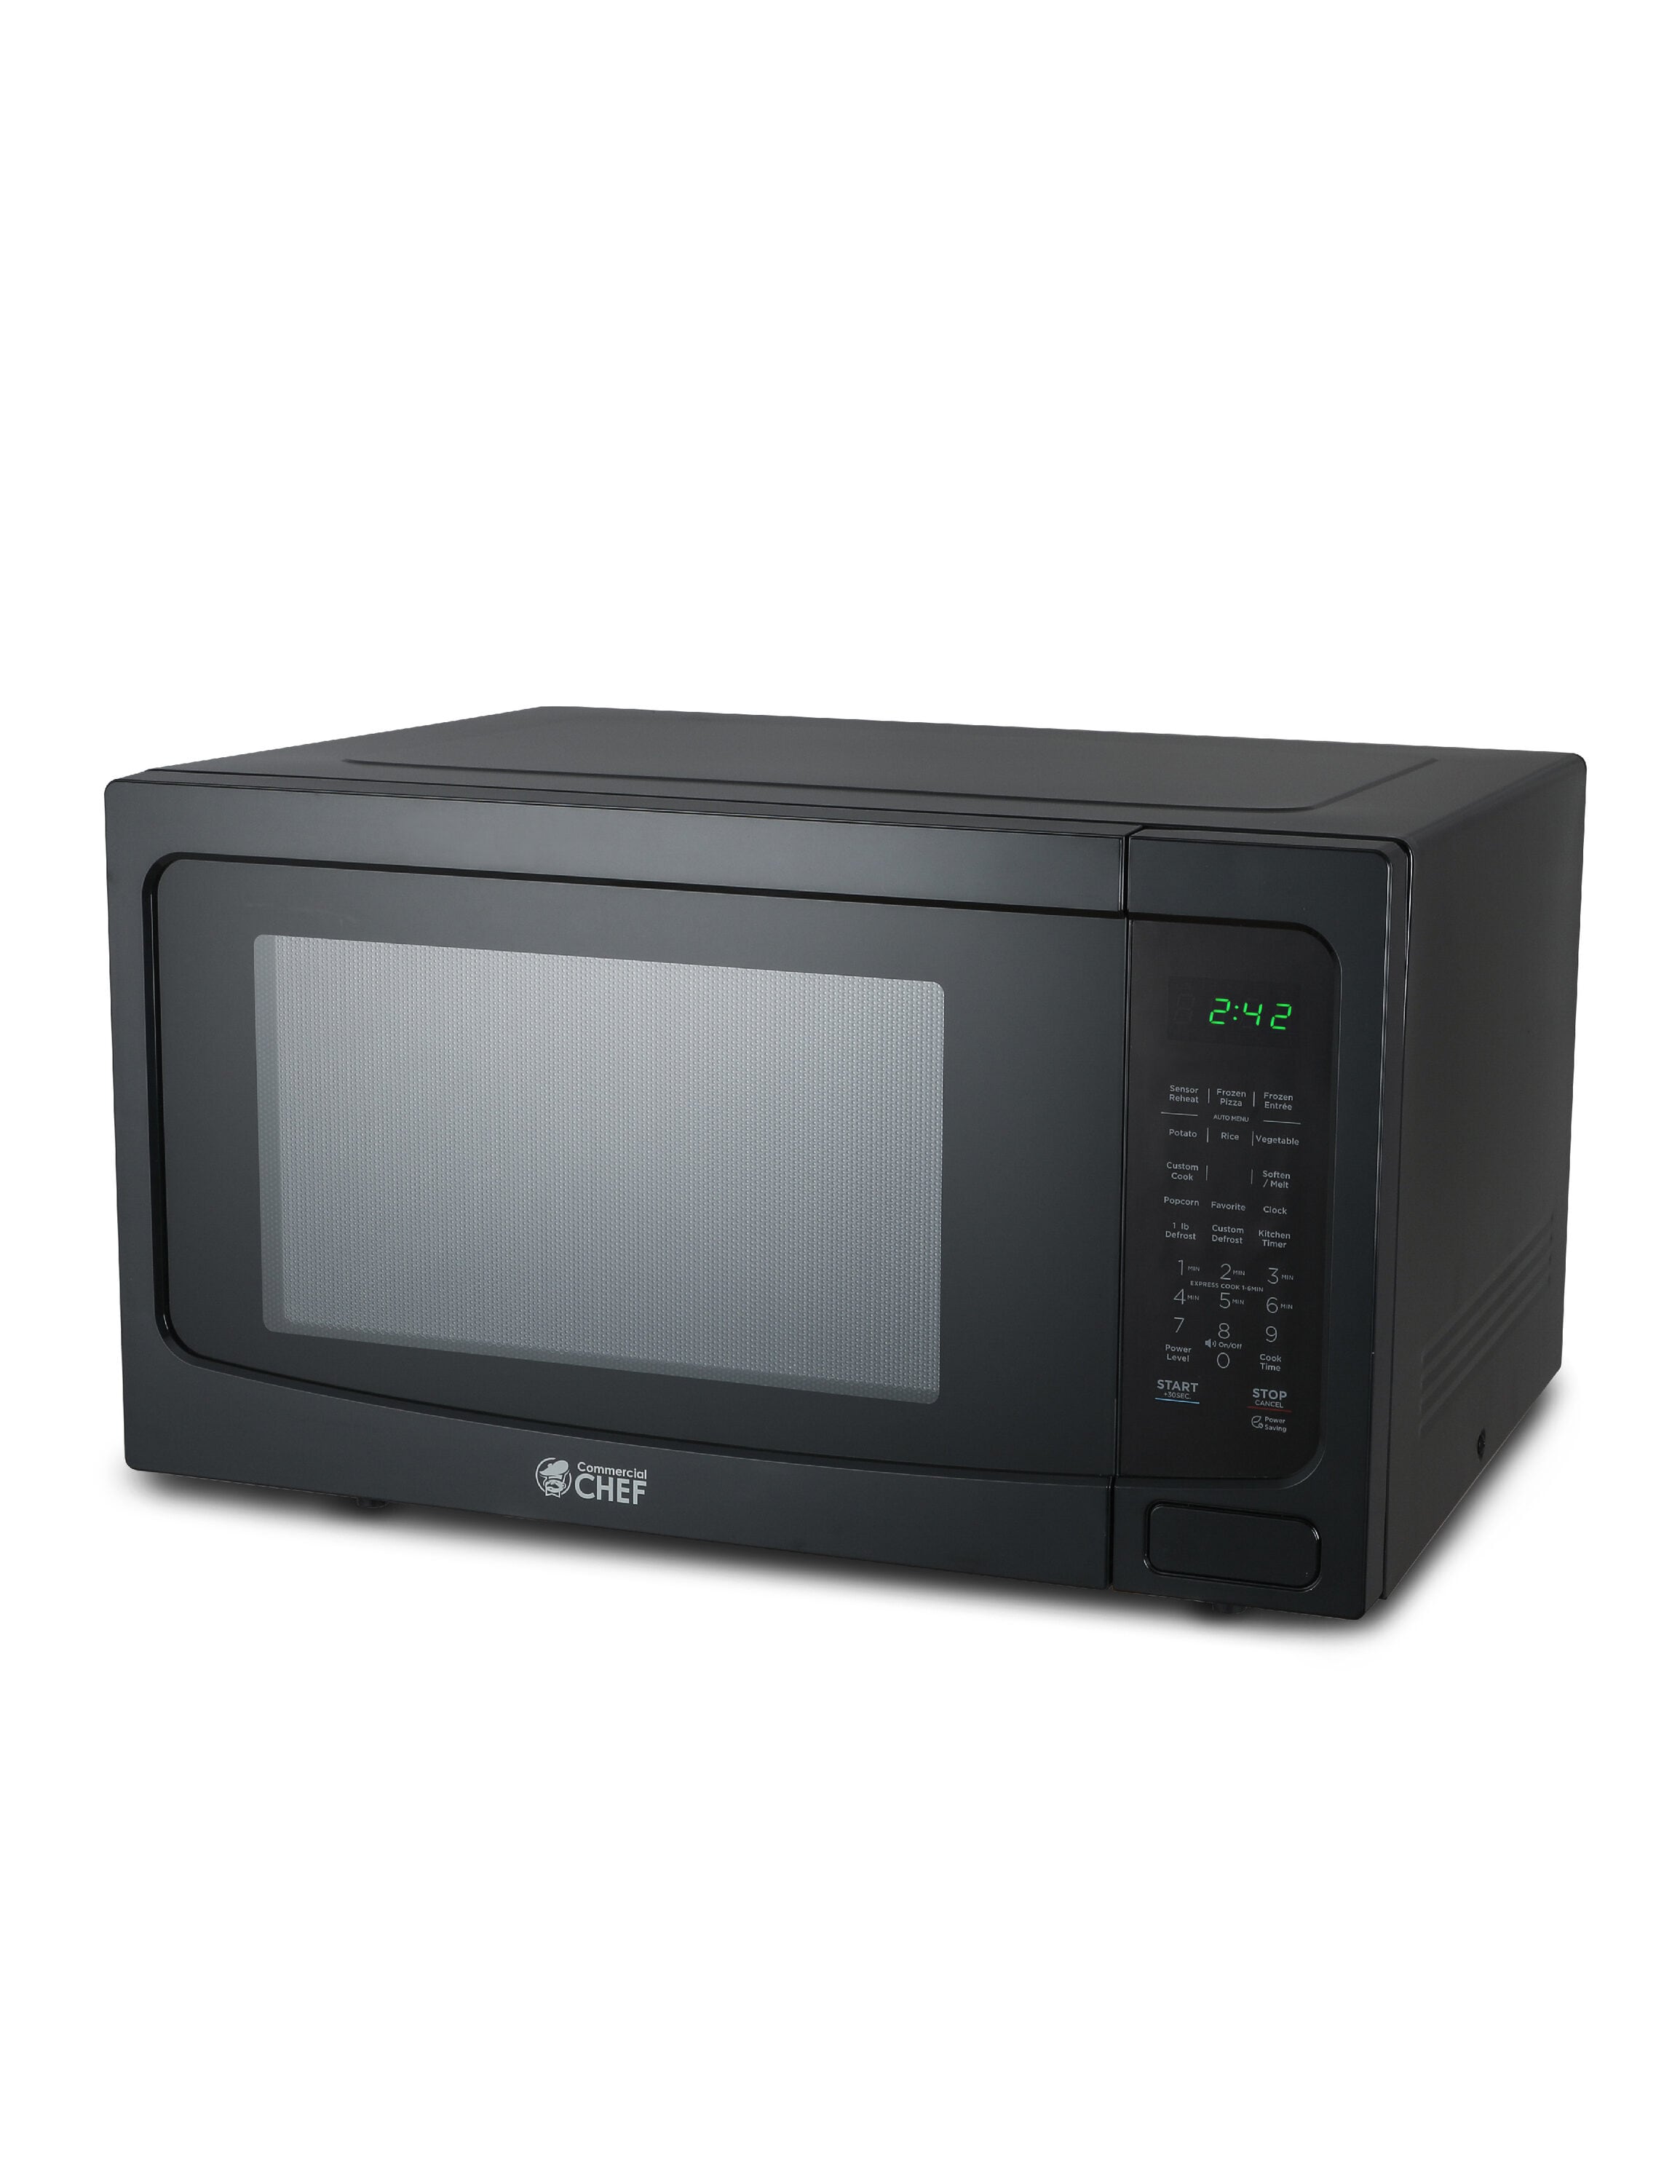 Commercial Chef 1.6 Cu. ft. Countertop Microwave Oven Stainless